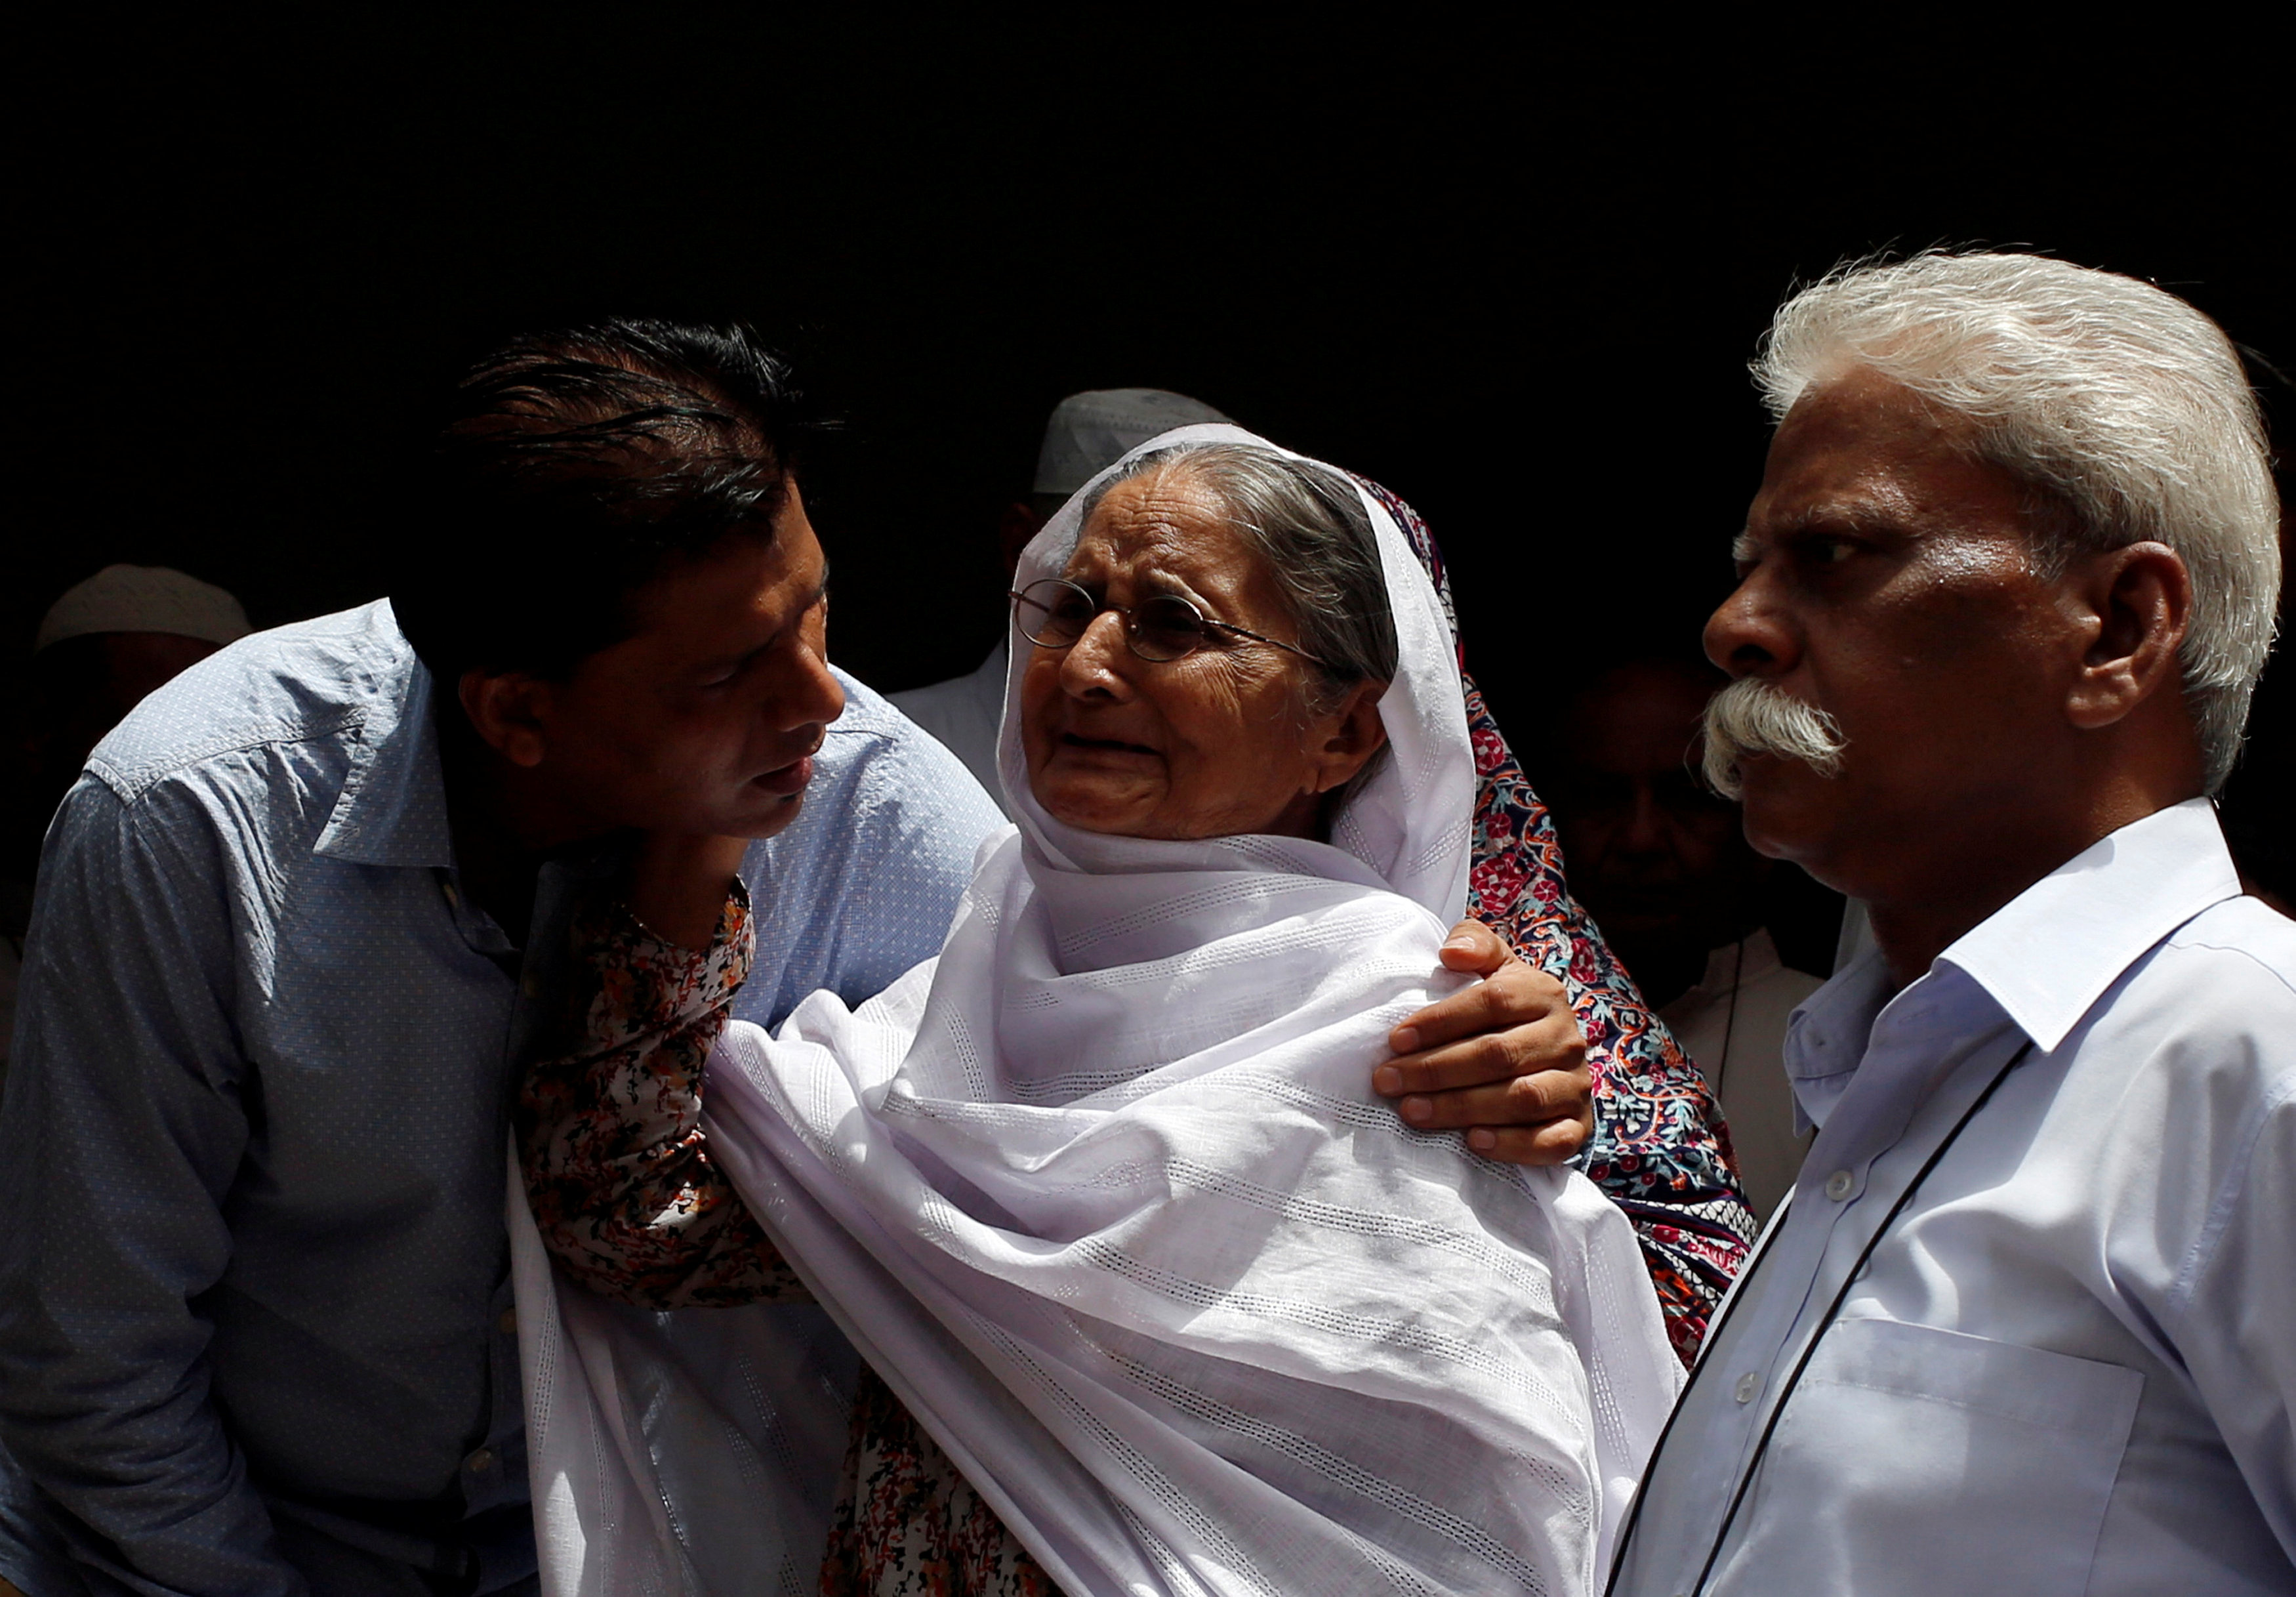 Father of Pakistani girl killed in Texas hopes her death can spur reform